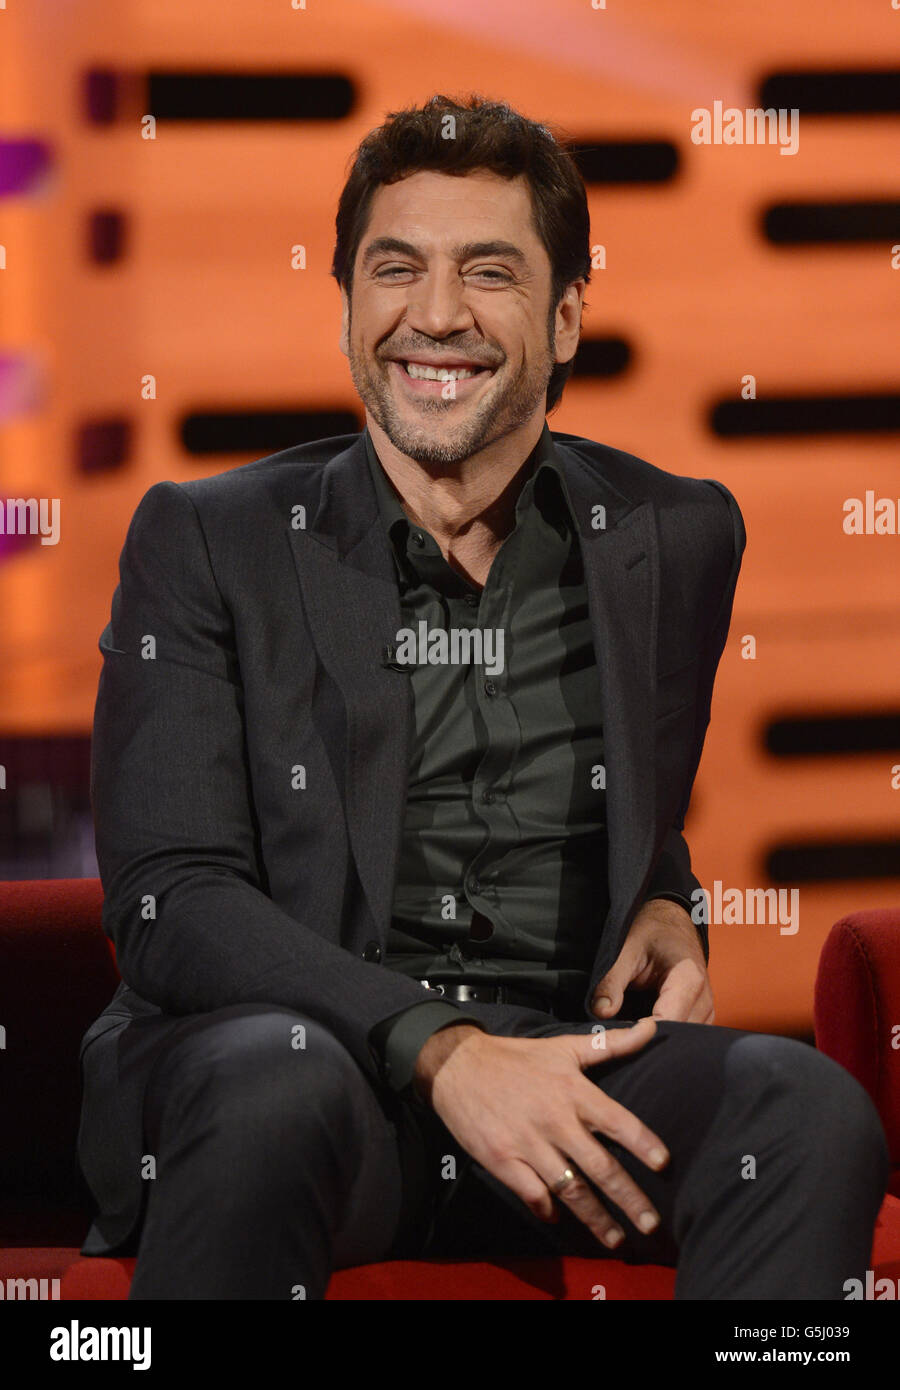 Guest Javier Bardem at the filming of the Graham Norton Show (TX: 22.35 Friday October 26, BBC One), at The London Studios in south London. Stock Photo